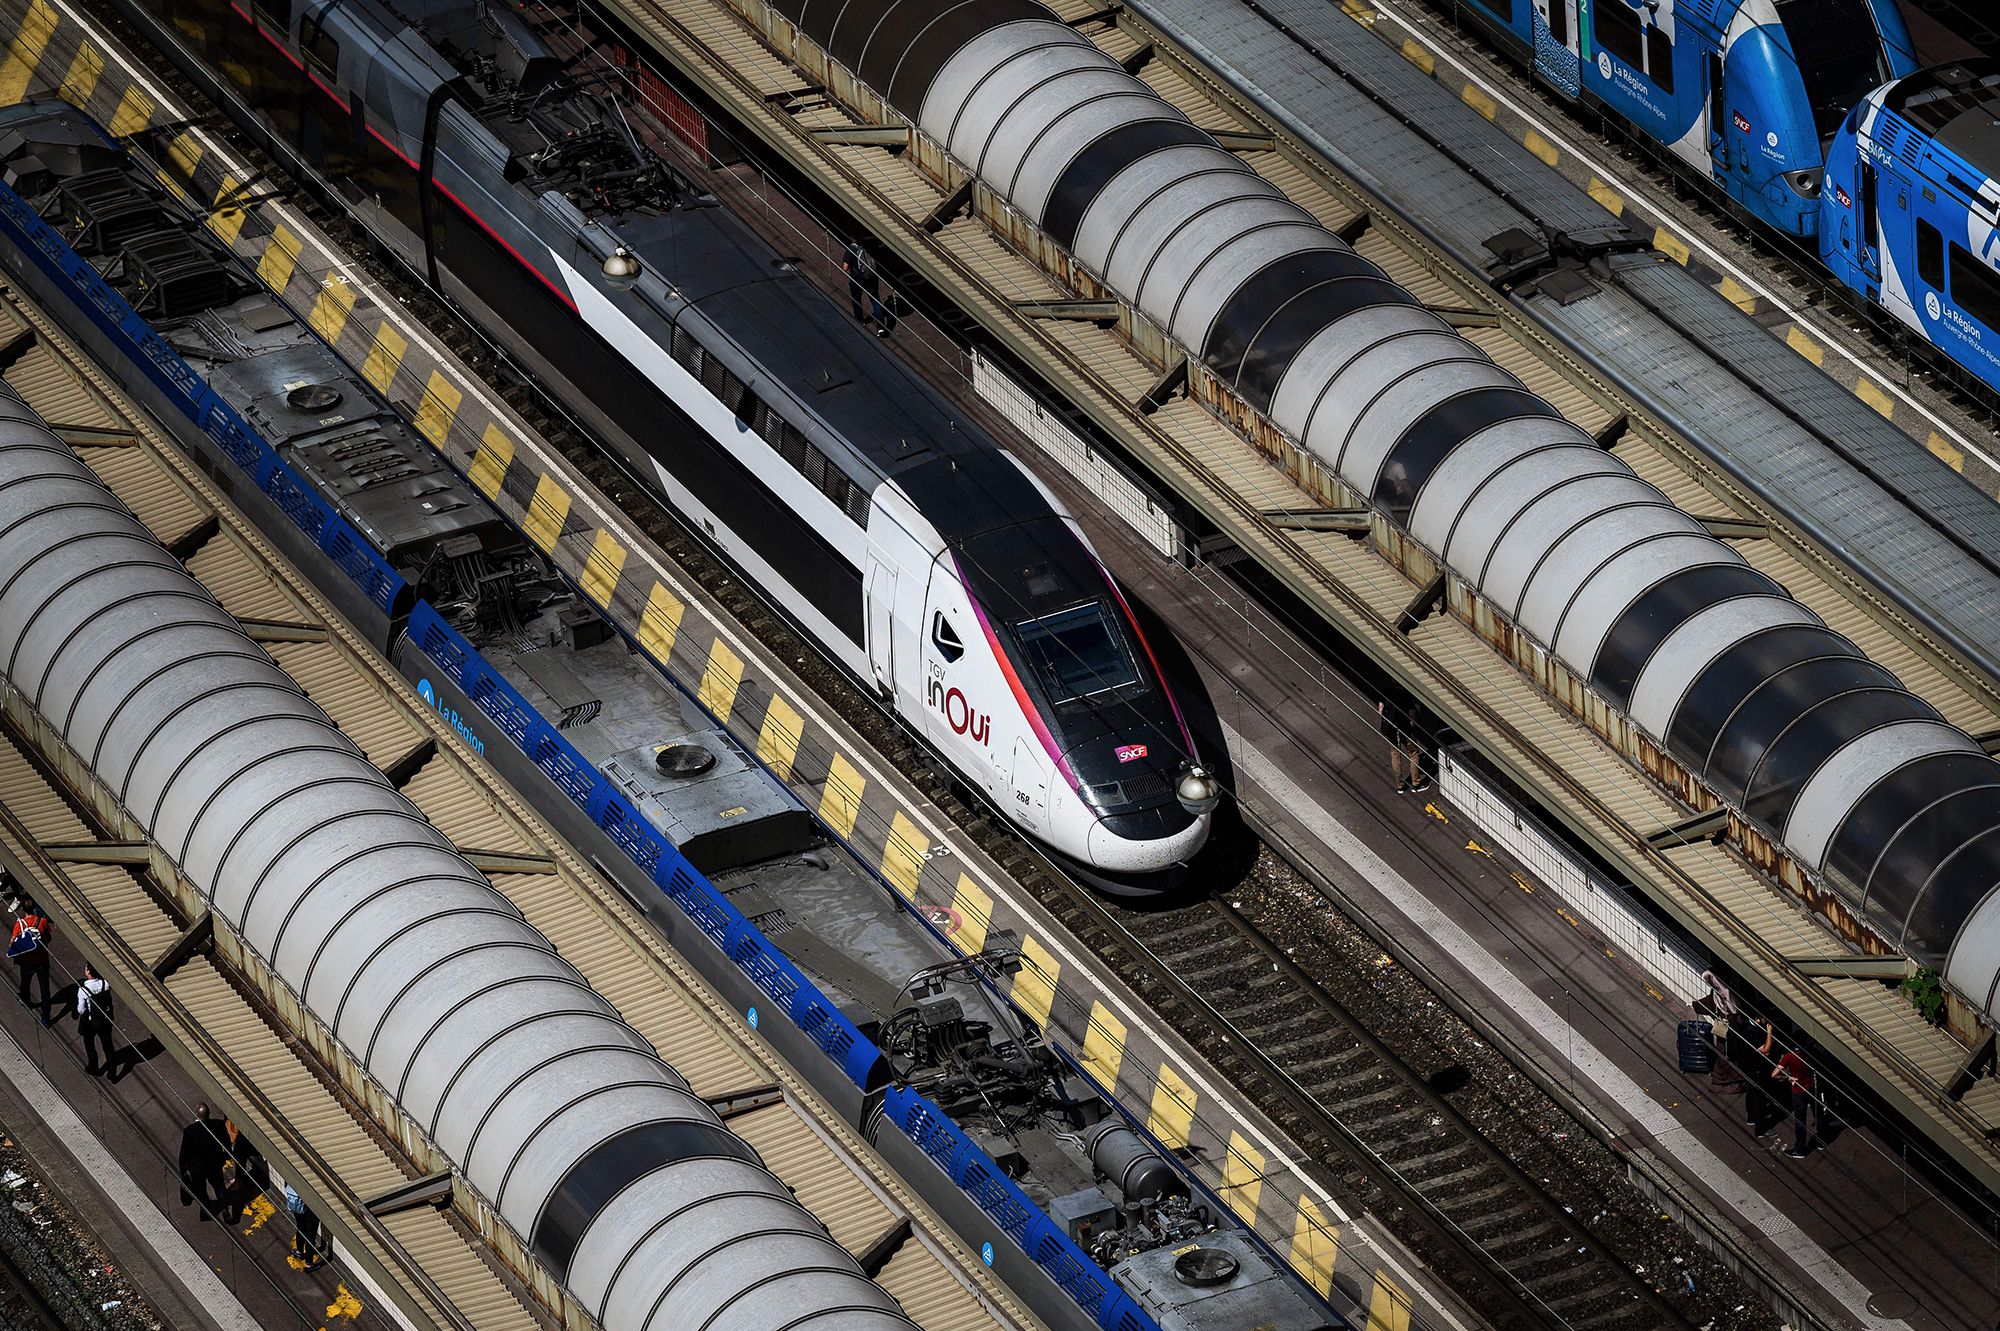 Europe wants a high-speed rail network to replace airplanes